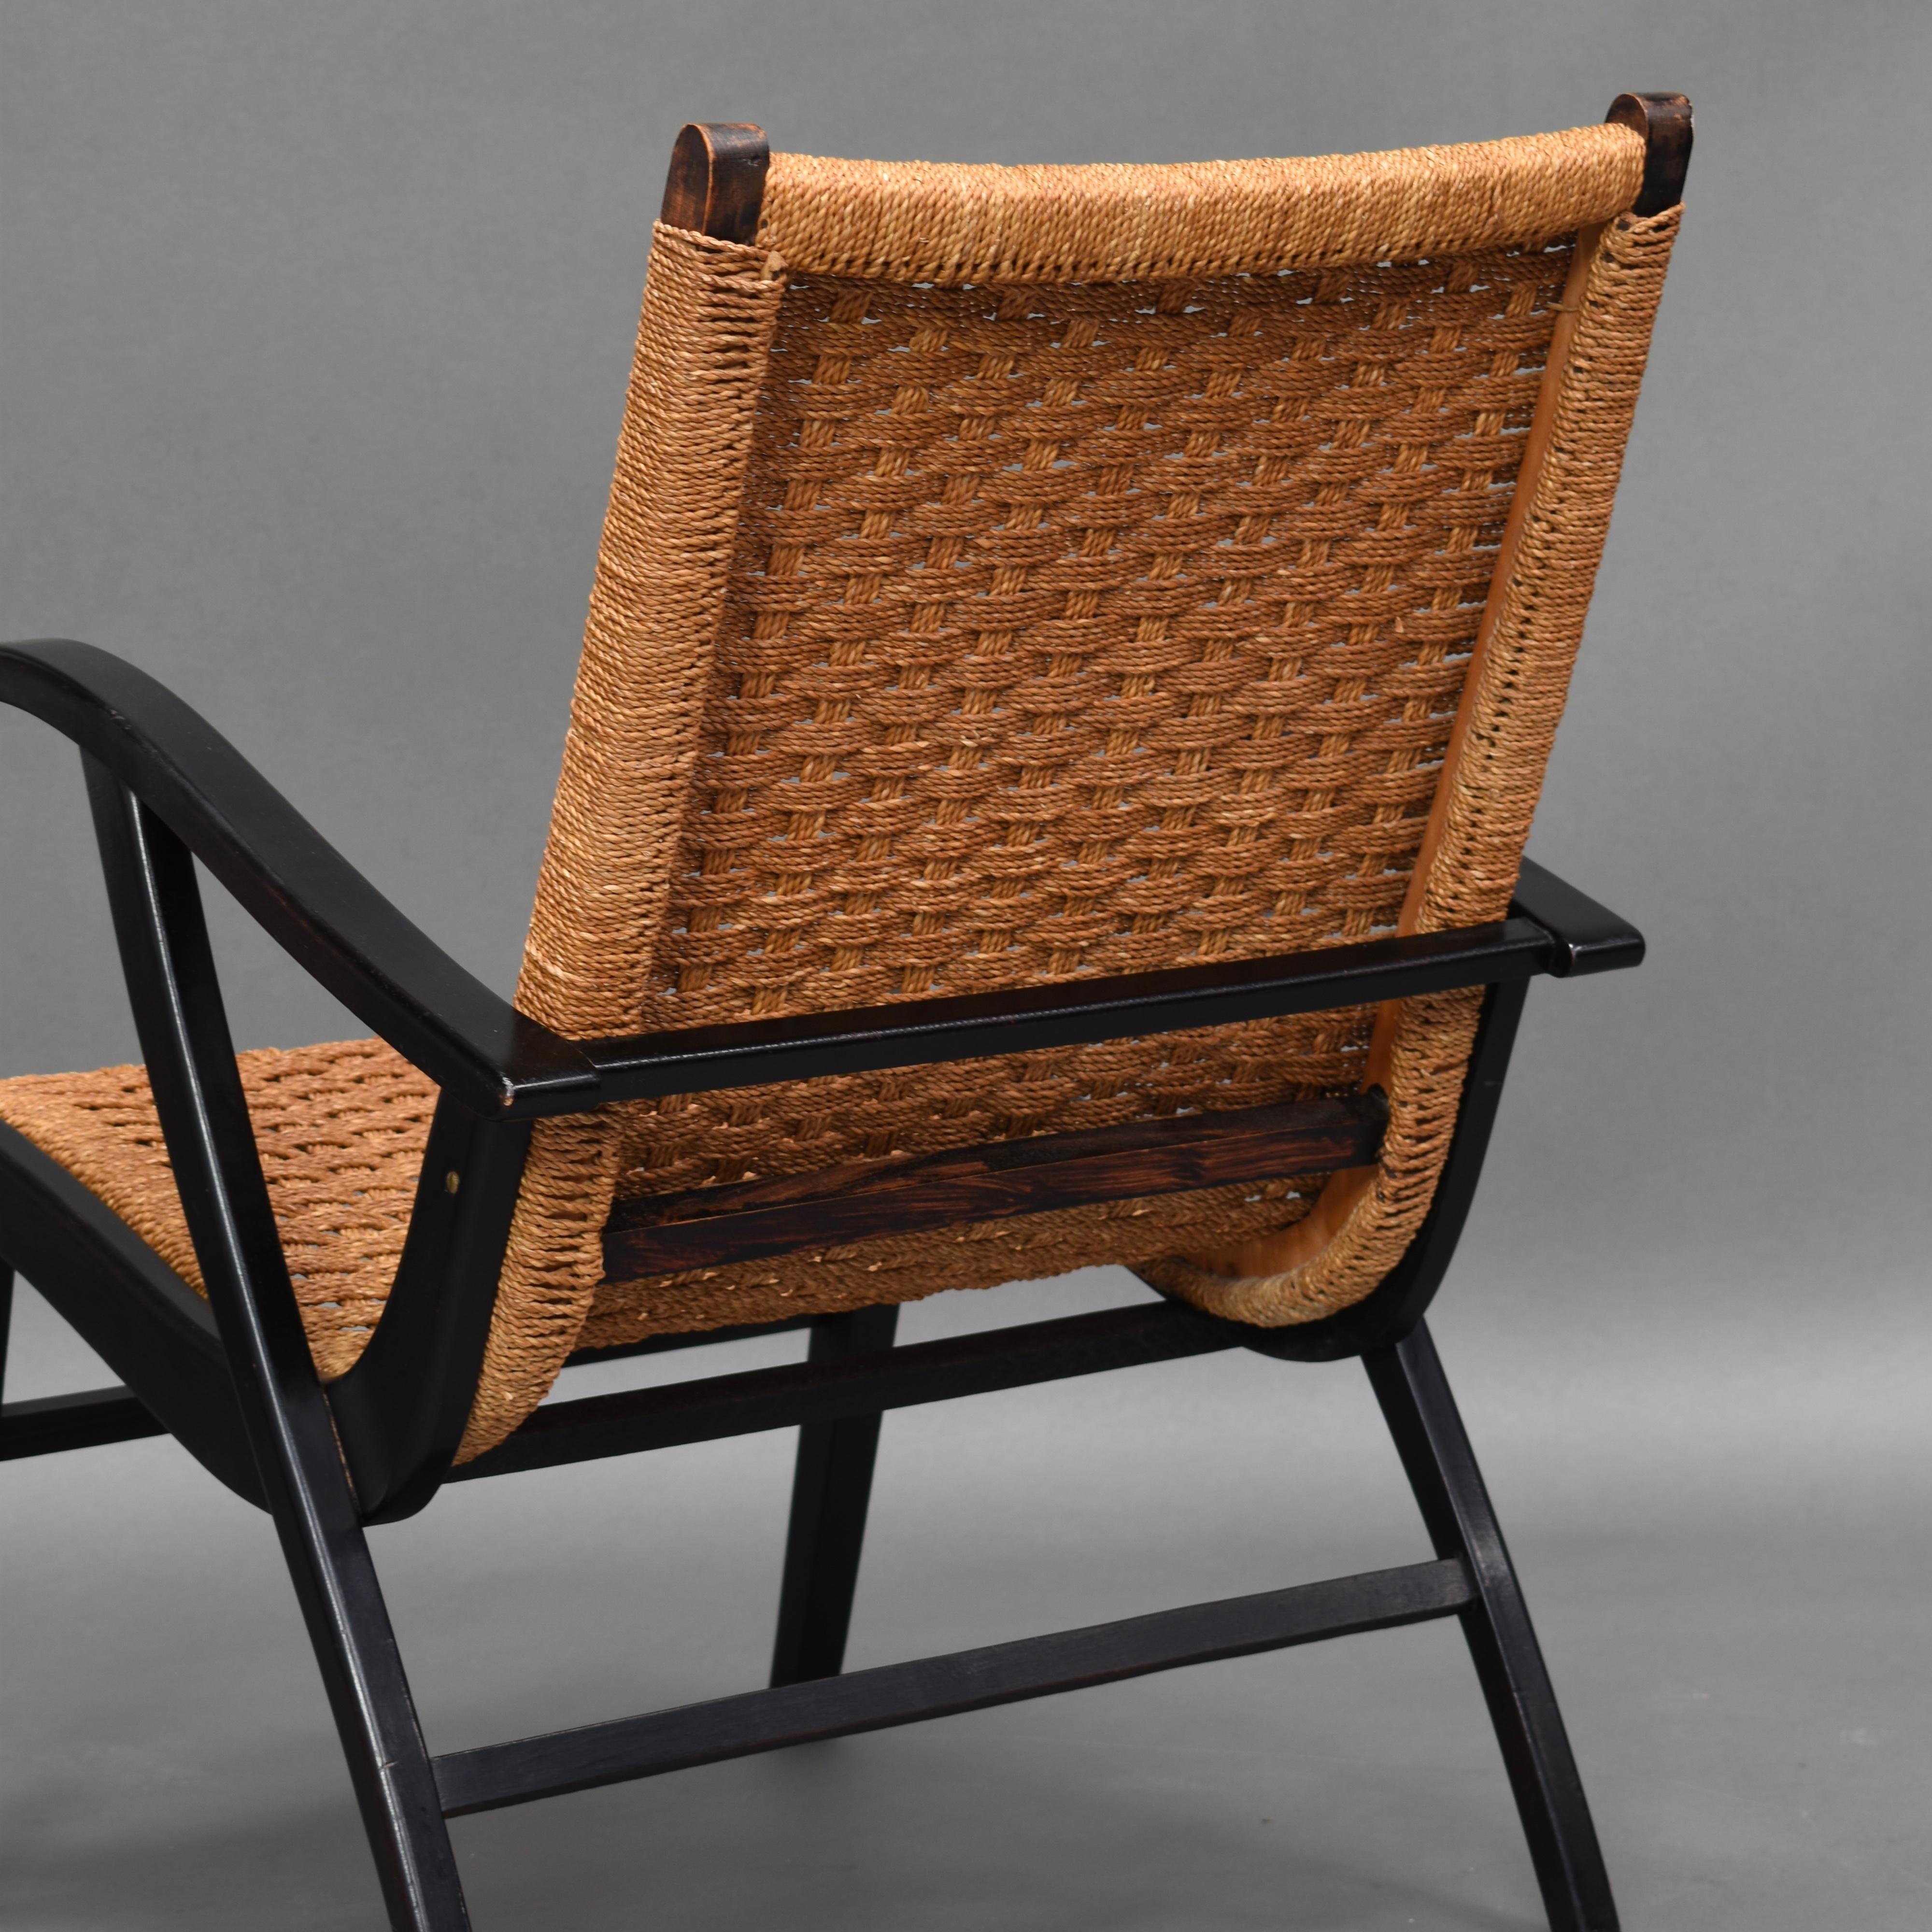 Dutch Lounge Armchair in Papercord by Vroom & Dreesman, Netherlands, 1957